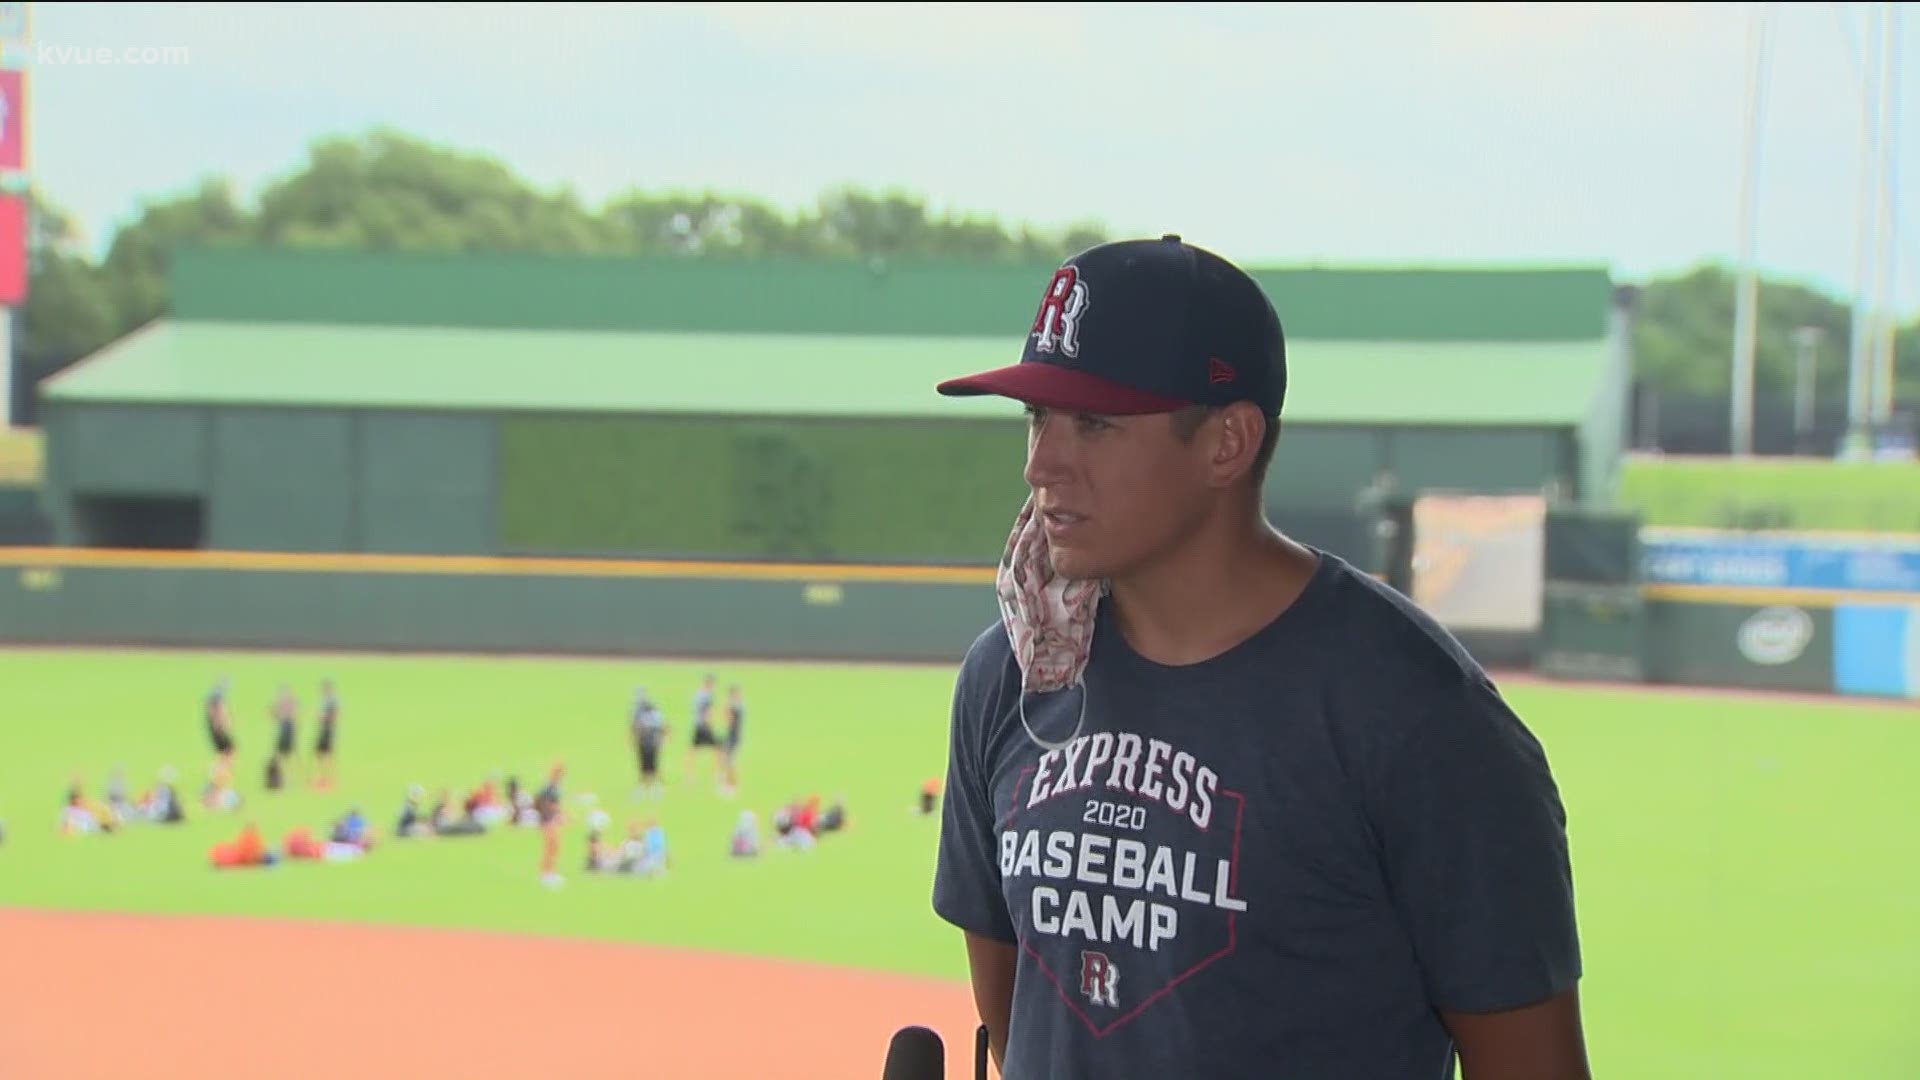 Chase Almendarez, who is the baseball operations manager, joined KVUE to talk about what's next for Round Rock Express amid the COVID-19 pandemic.